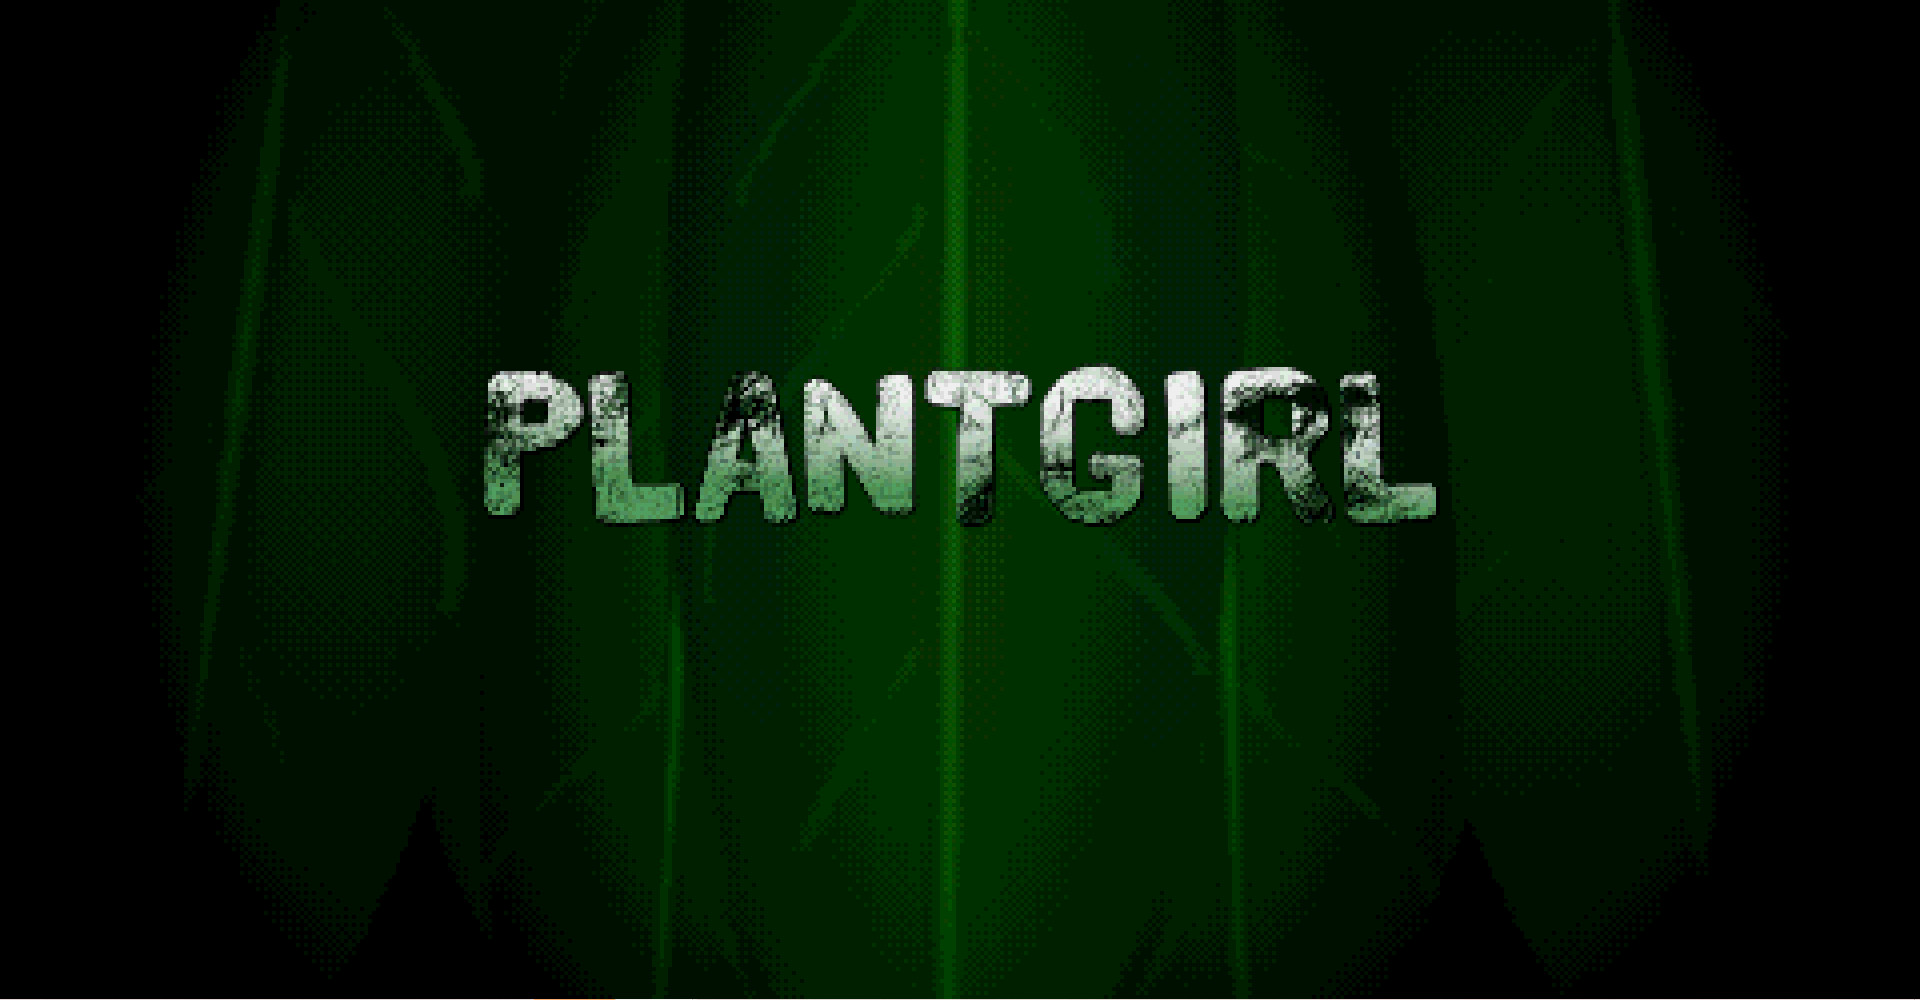 Plant girl game an indie 3D stealth game